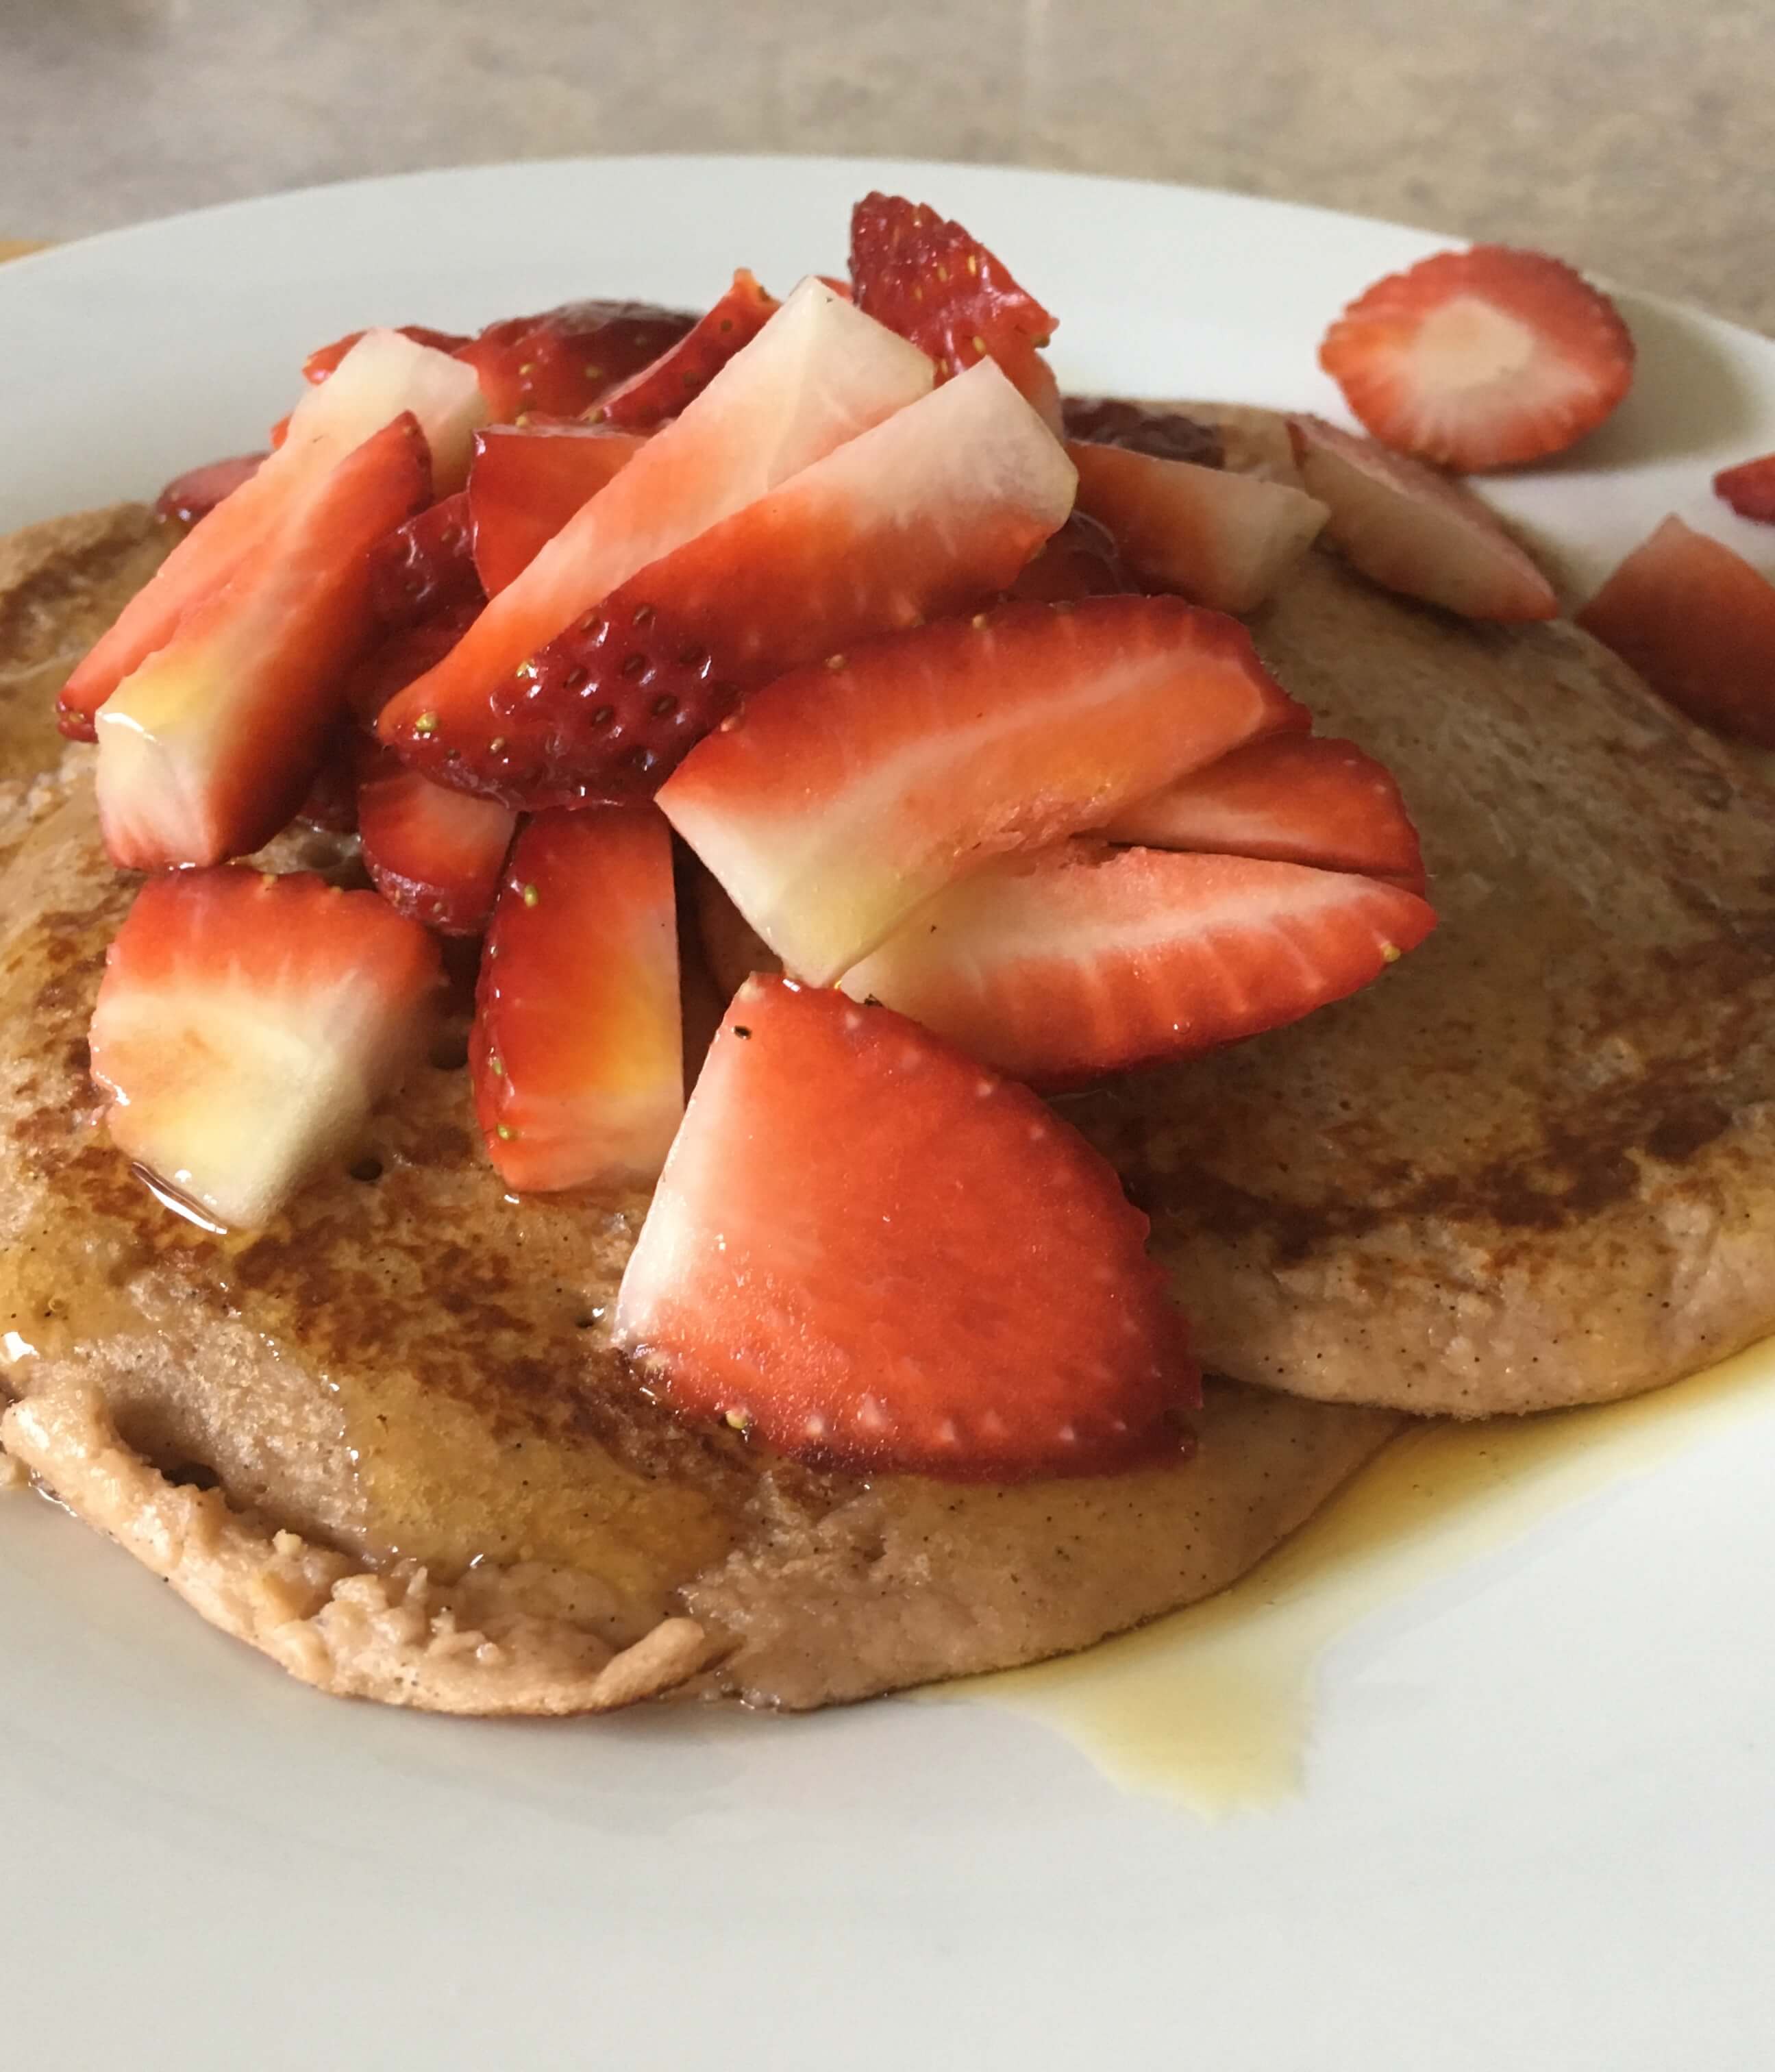 pancakes topped with strawberries and maple syrup